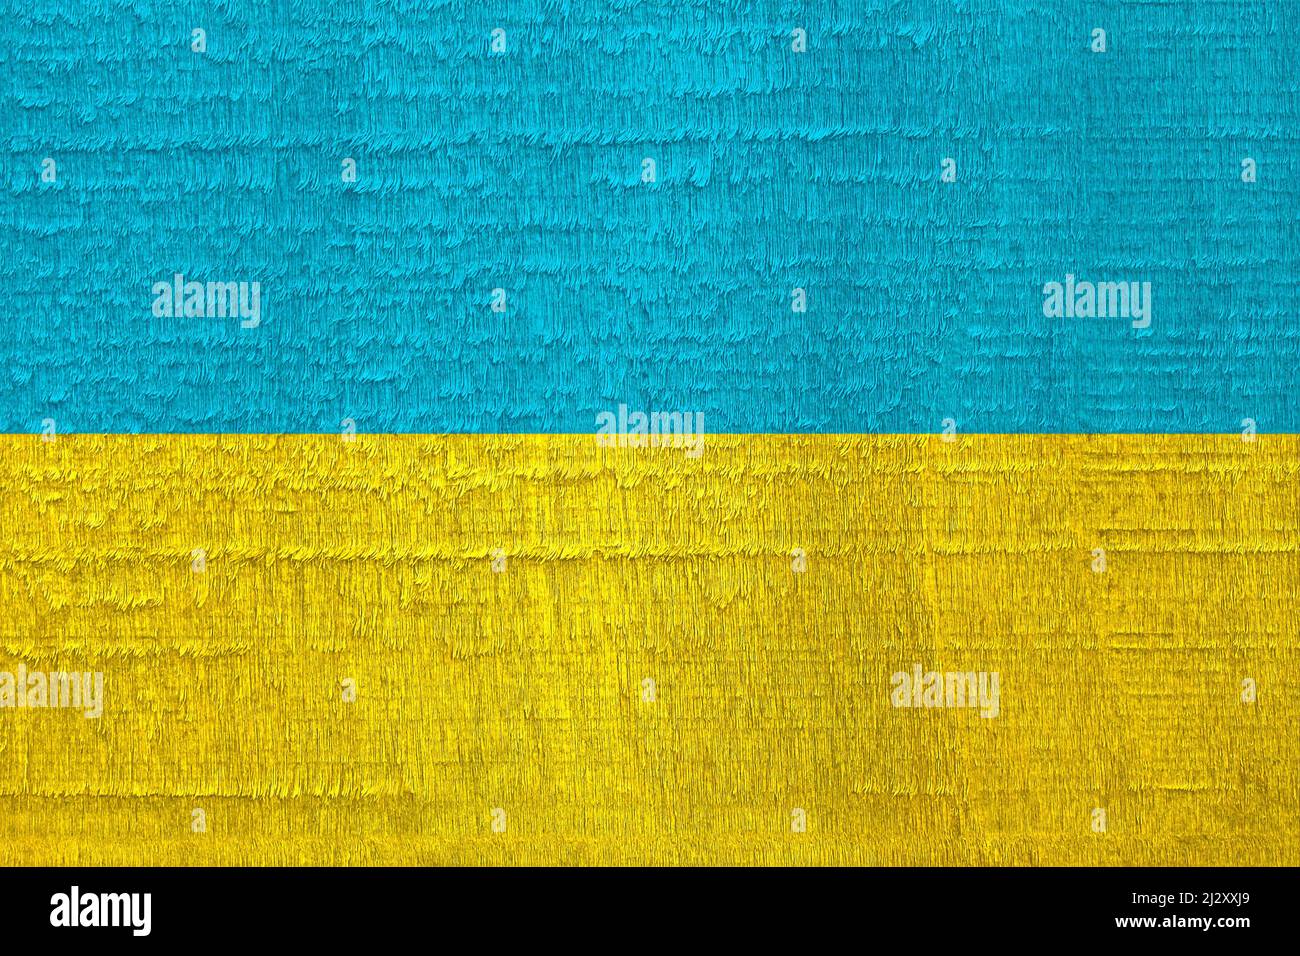 Flag of Ukraine with blue and yellow colors painted on the old dried wooden texture, Ukrainian national patriotic symbol of Independence, sovereignty Stock Photo